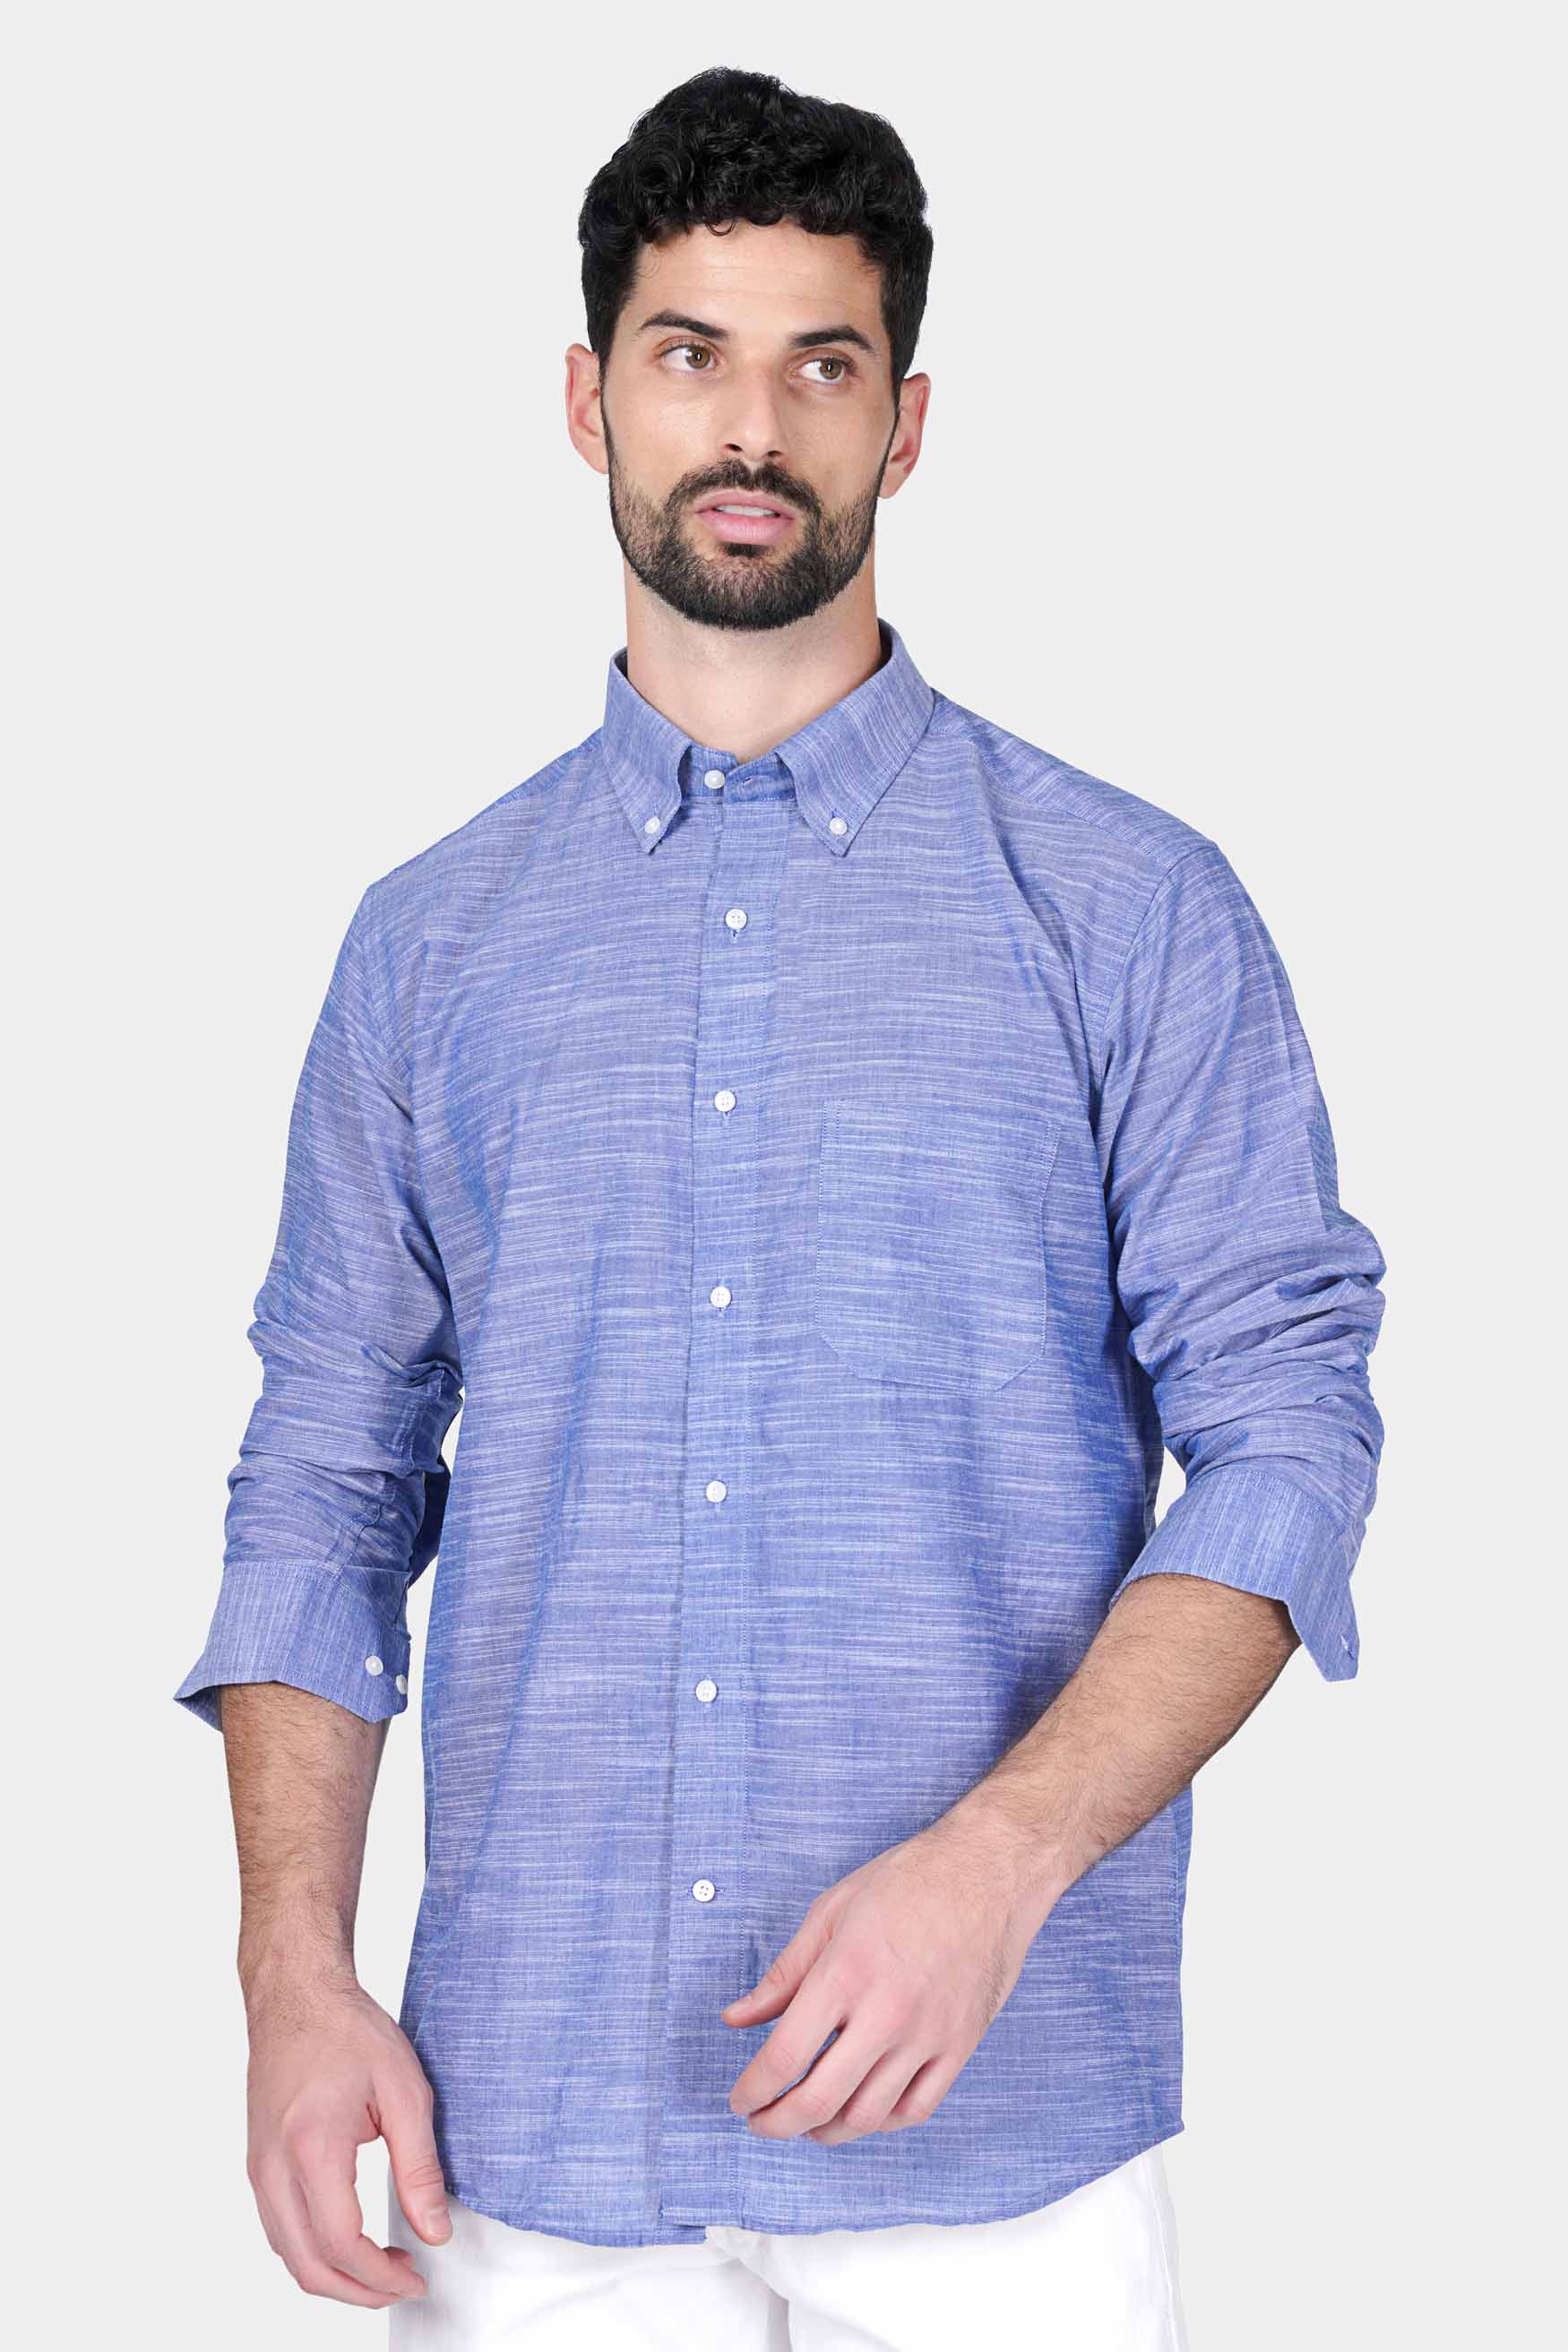 Periwinkle Blue Brand Name Embroidered Luxurious Linen Designer Shirt 5660-BD-E284-38, 5660-BD-E284-H-38, 5660-BD-E284-39, 5660-BD-E284-H-39, 5660-BD-E284-40, 5660-BD-E284-H-40, 5660-BD-E284-42, 5660-BD-E284-H-42, 5660-BD-E284-44, 5660-BD-E284-H-44, 5660-BD-E284-46, 5660-BD-E284-H-46, 5660-BD-E284-48, 5660-BD-E284-H-48, 5660-BD-E284-50, 5660-BD-E284-H-50, 5660-BD-E284-52, 5660-BD-E284-H-52